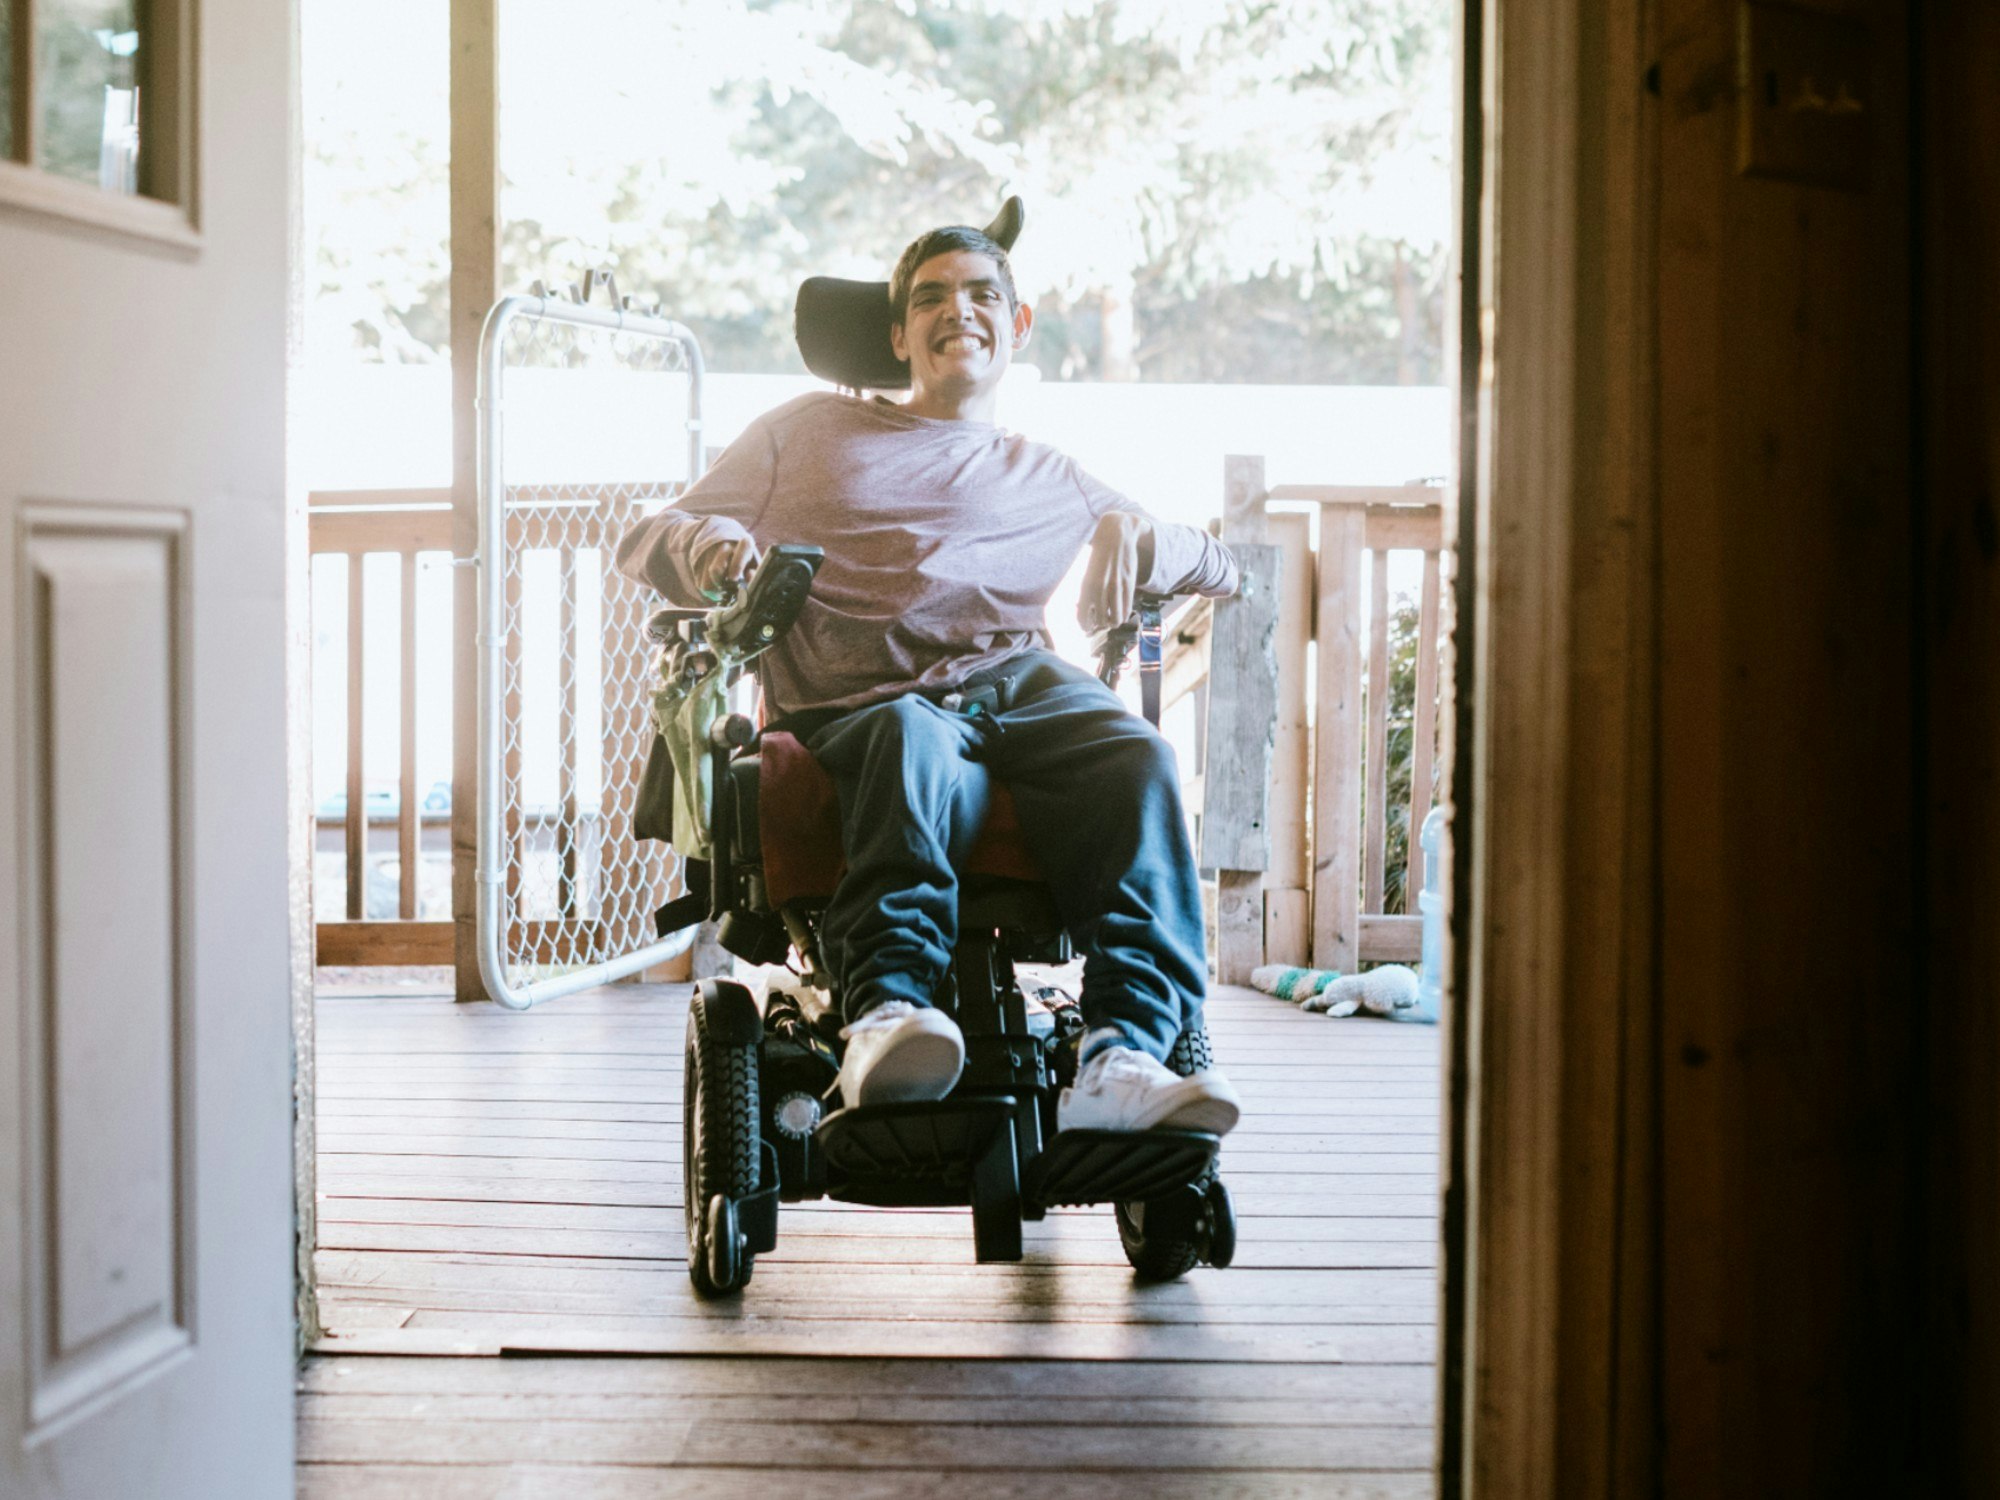 <p>In 2008, the building industry set an aspirational target of all housing being accessible by 2020, however, less than five percent of houses built were accessible. [Source: iStock]</p>
